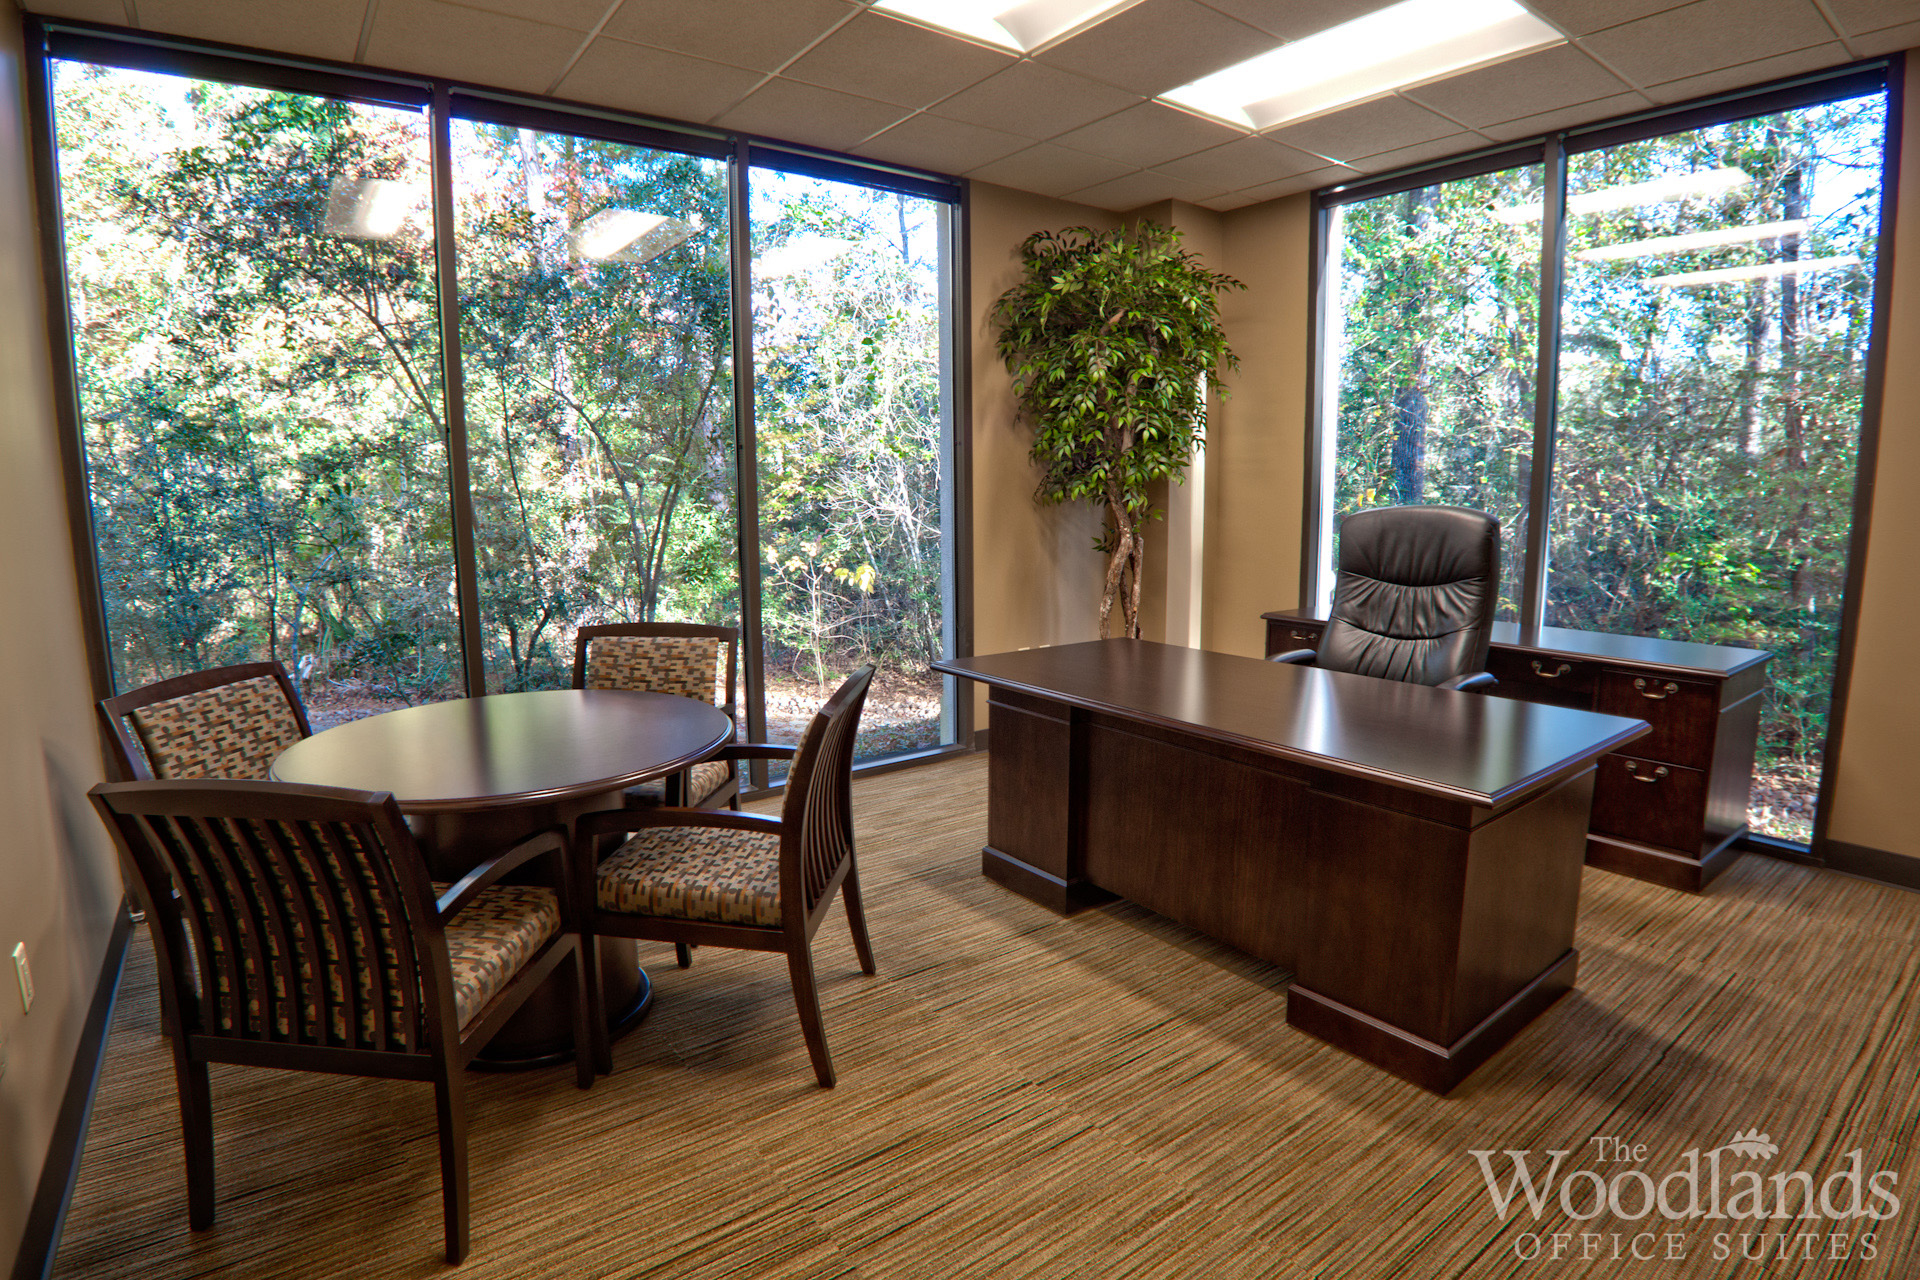 Corner Office Suites offer a spectacular view of The Woodlands